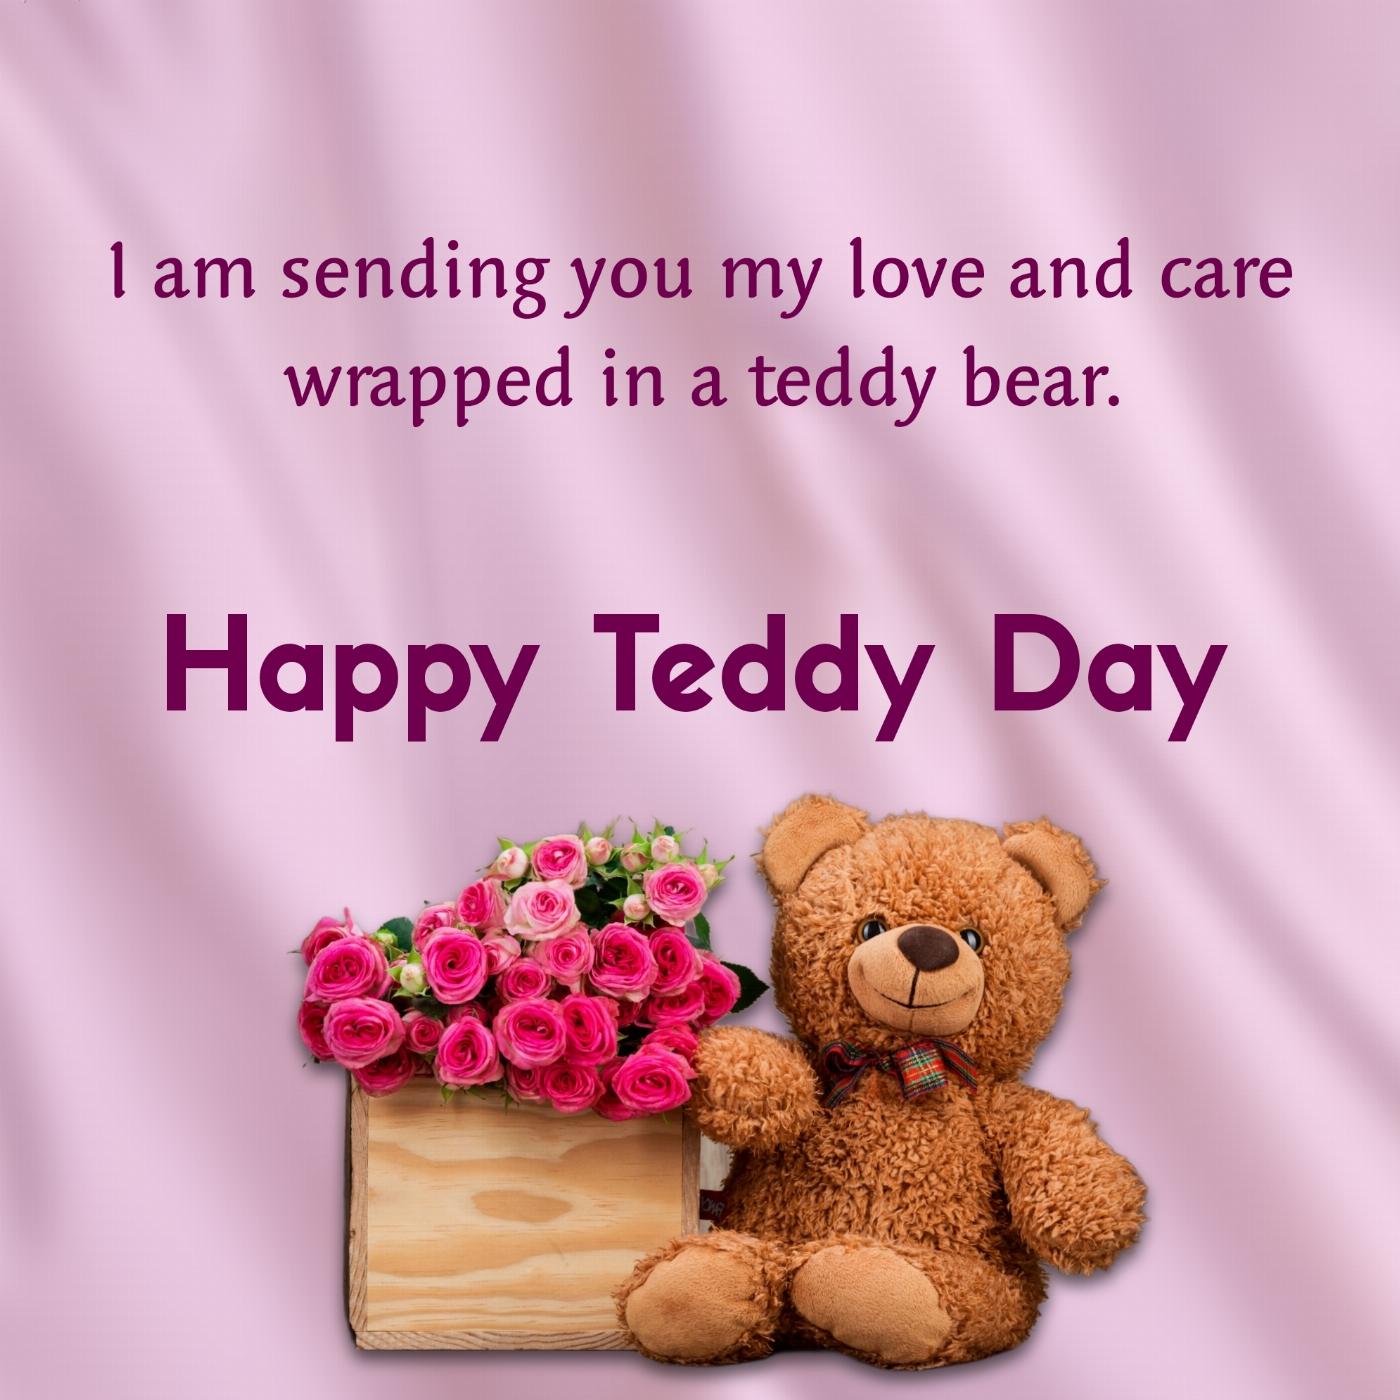 I am sending you my love and care wrapped in a teddy bear